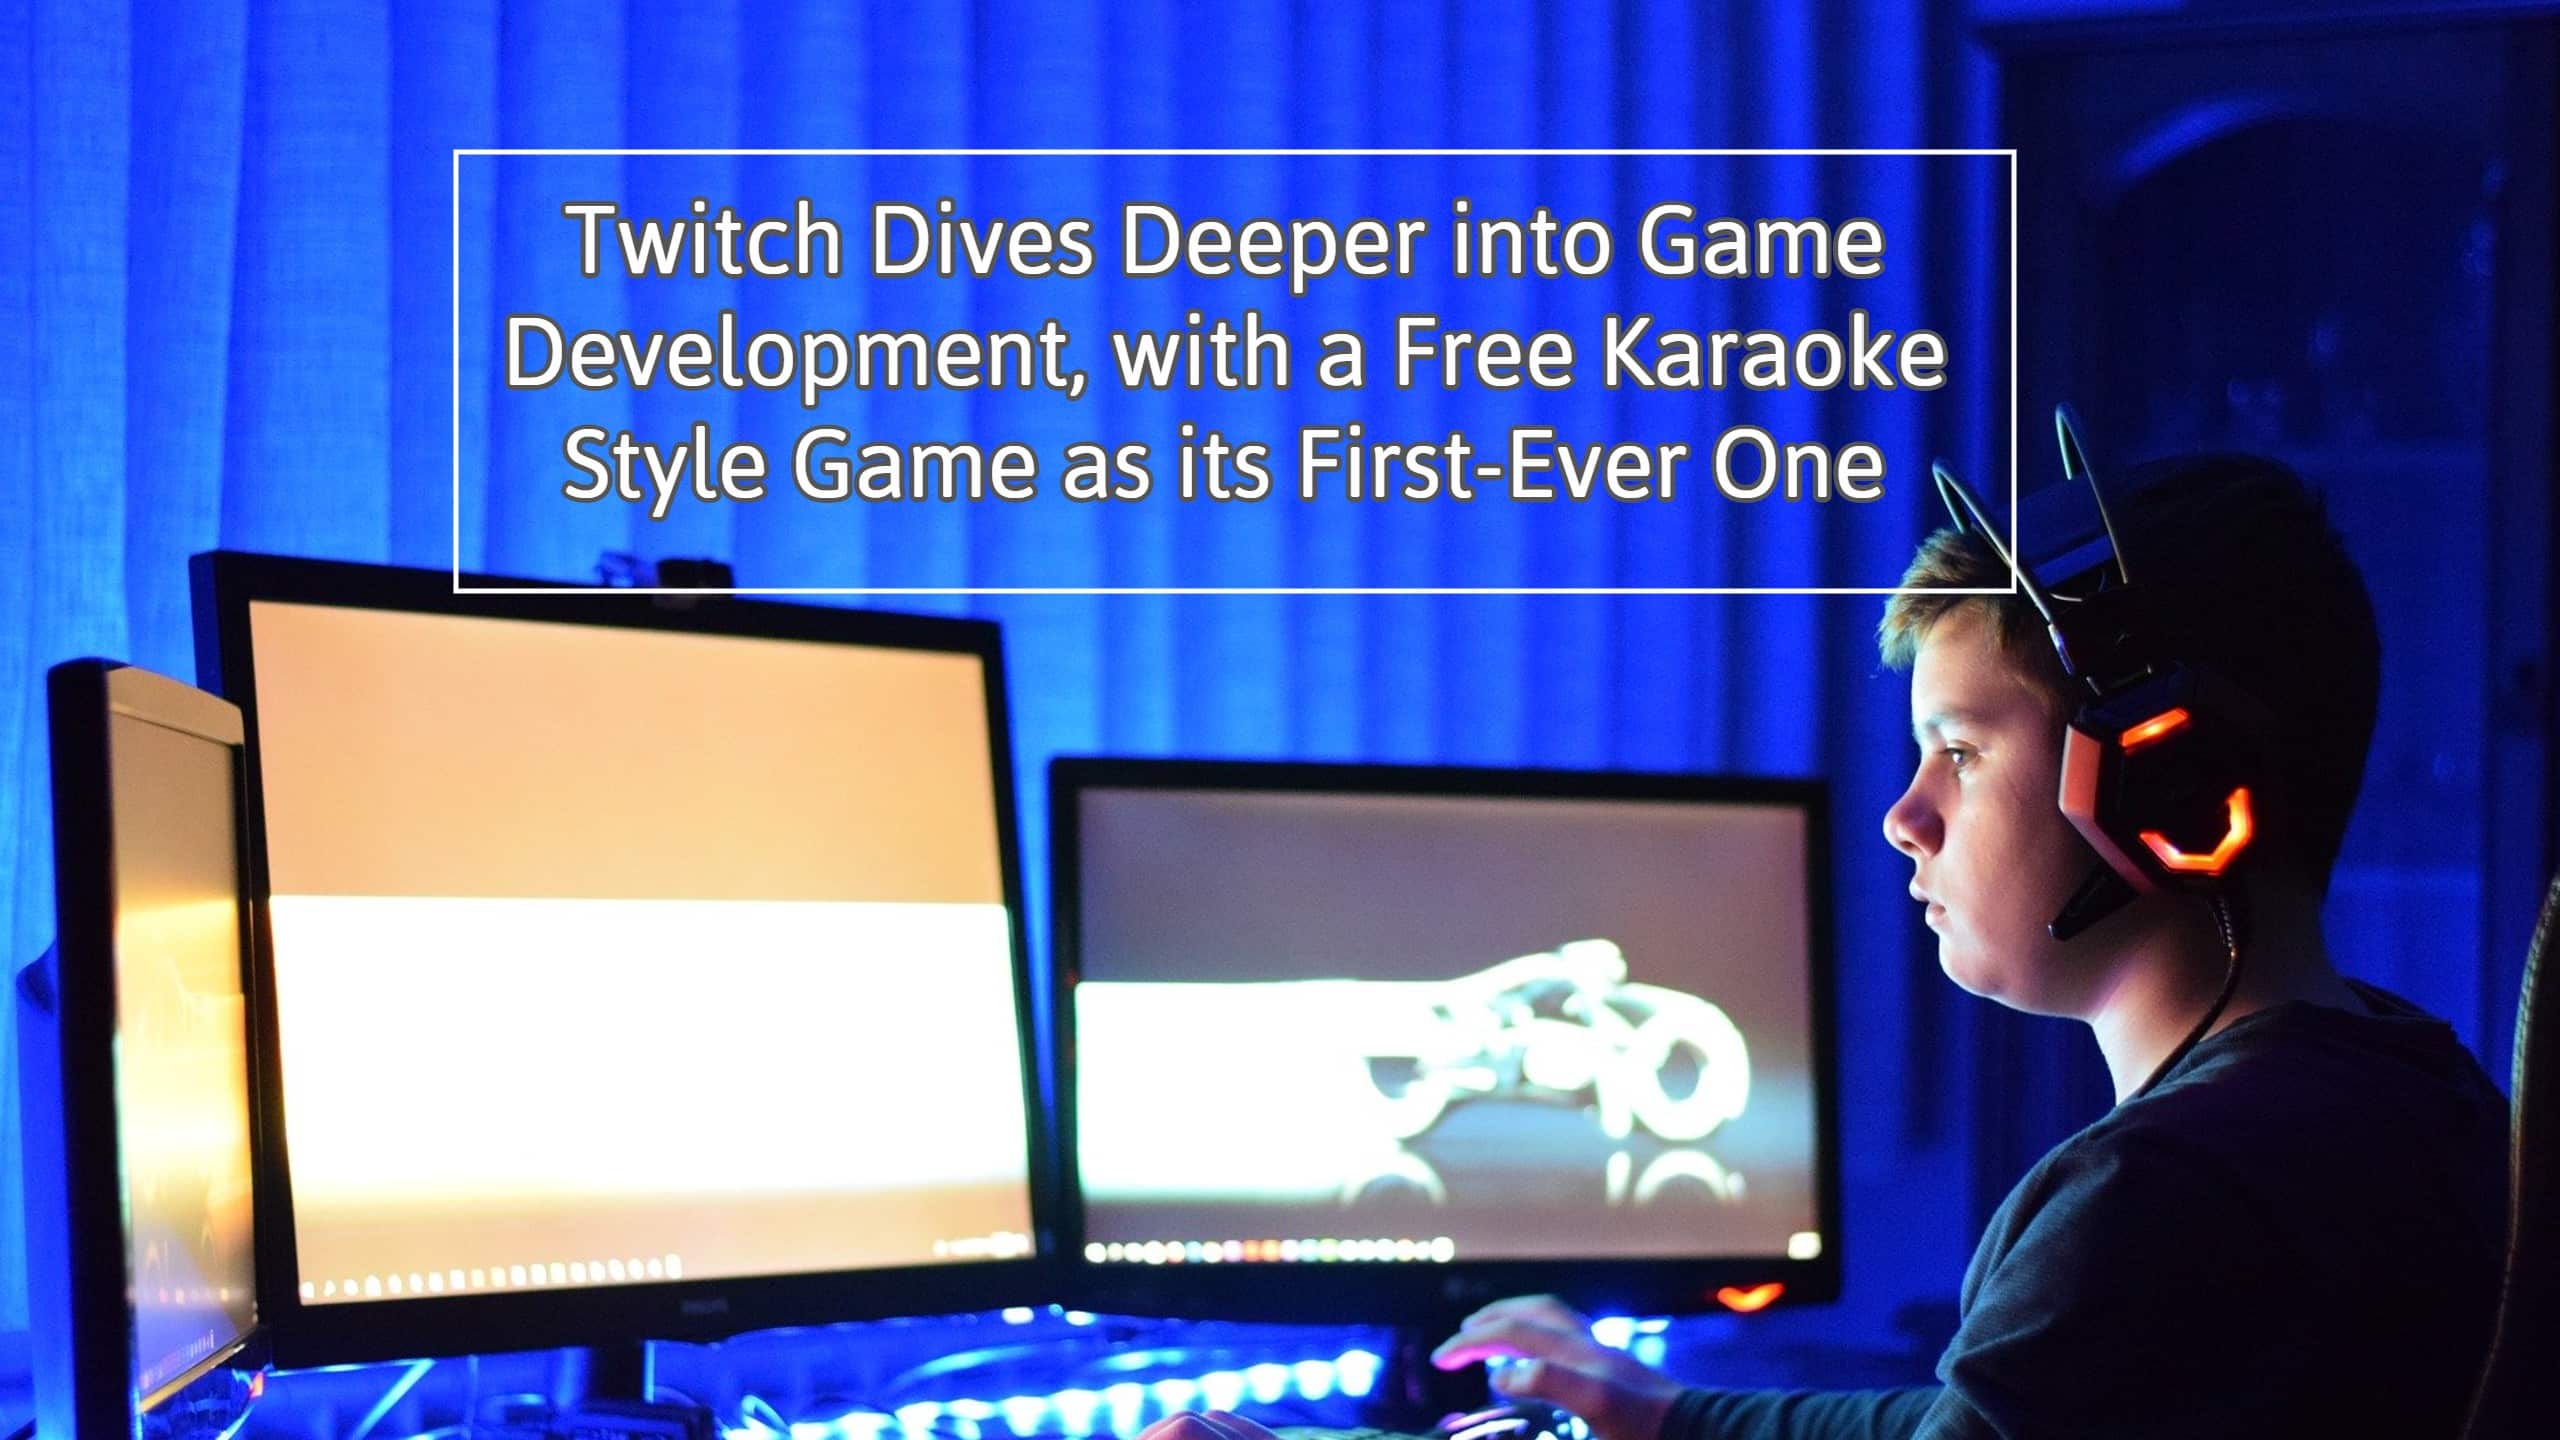 Twitch Dives Deeper into Game Development, with a Free Karaoke Style Game as its First-Ever One